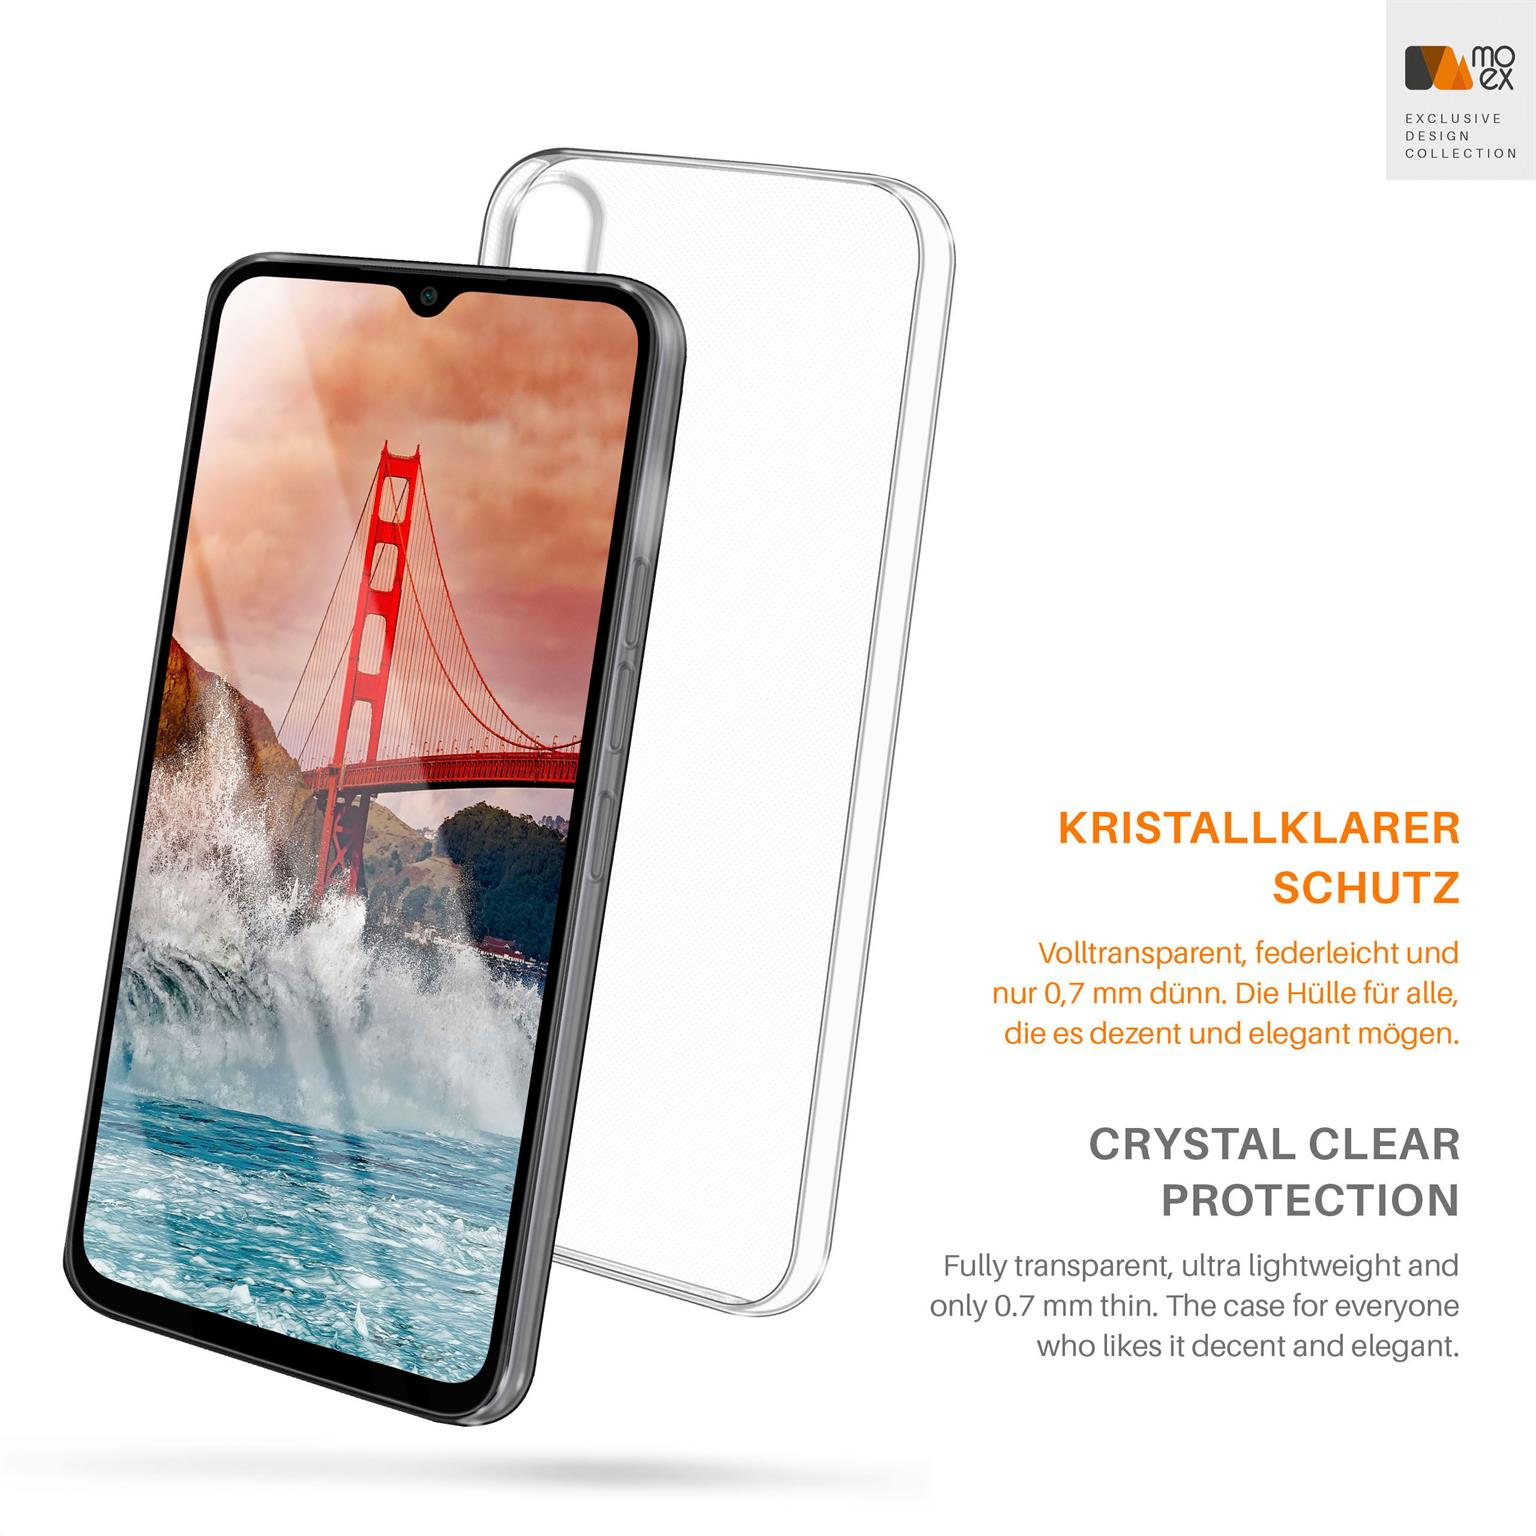 Case, Crystal-Clear MOEX Backcover, 9AT, Xiaomi, Aero Redmi